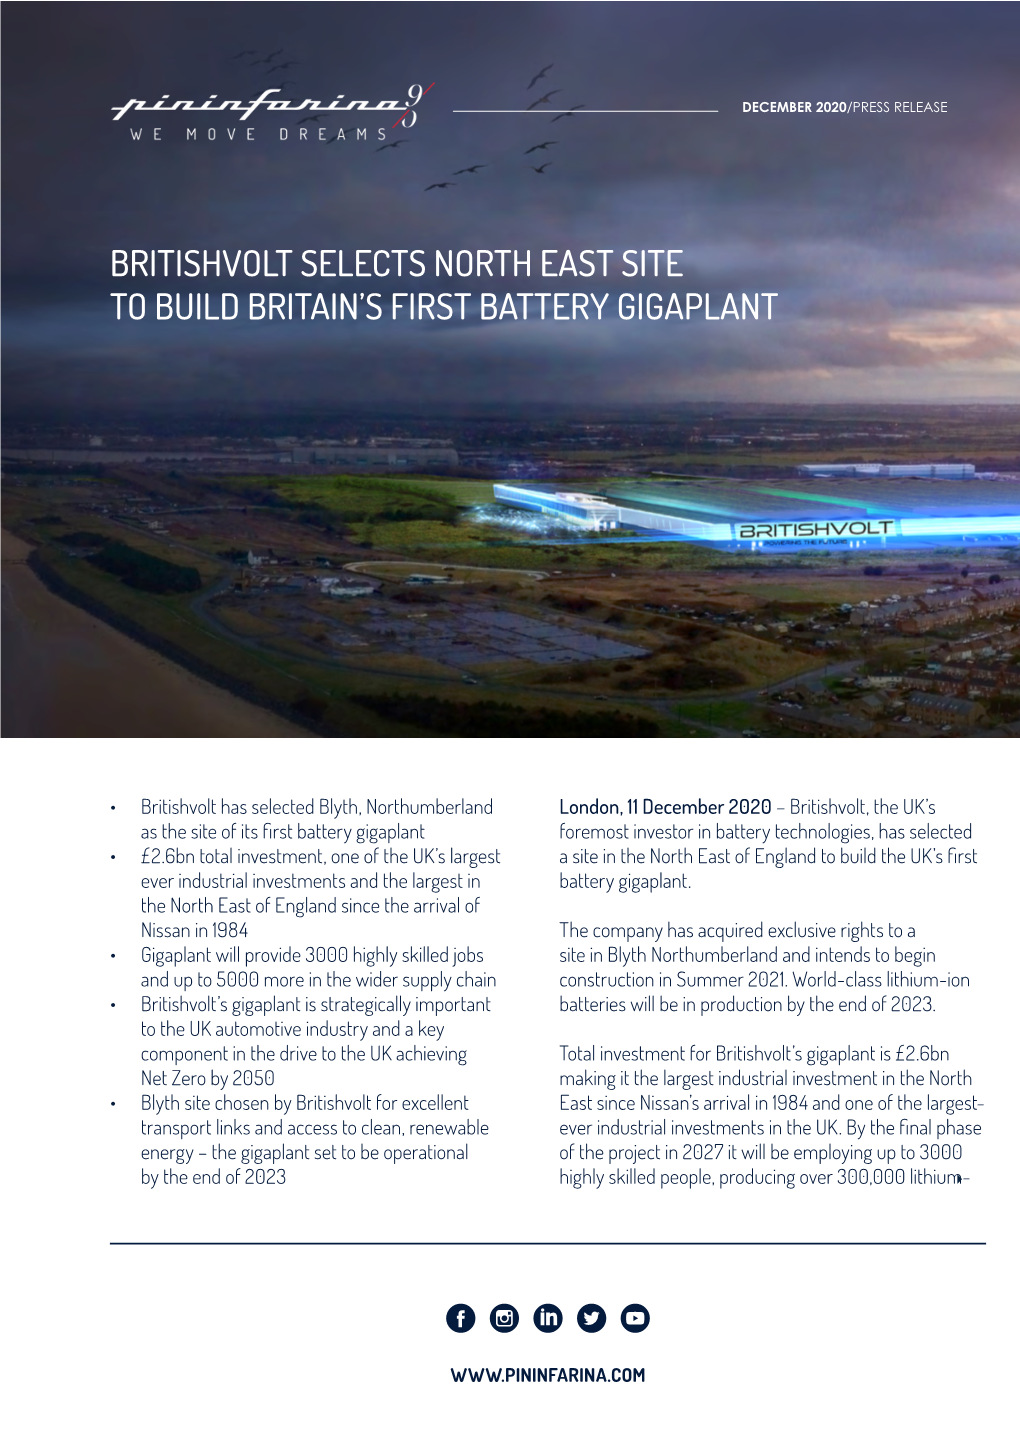 Britishvolt Selects North East Site to Build Britain's